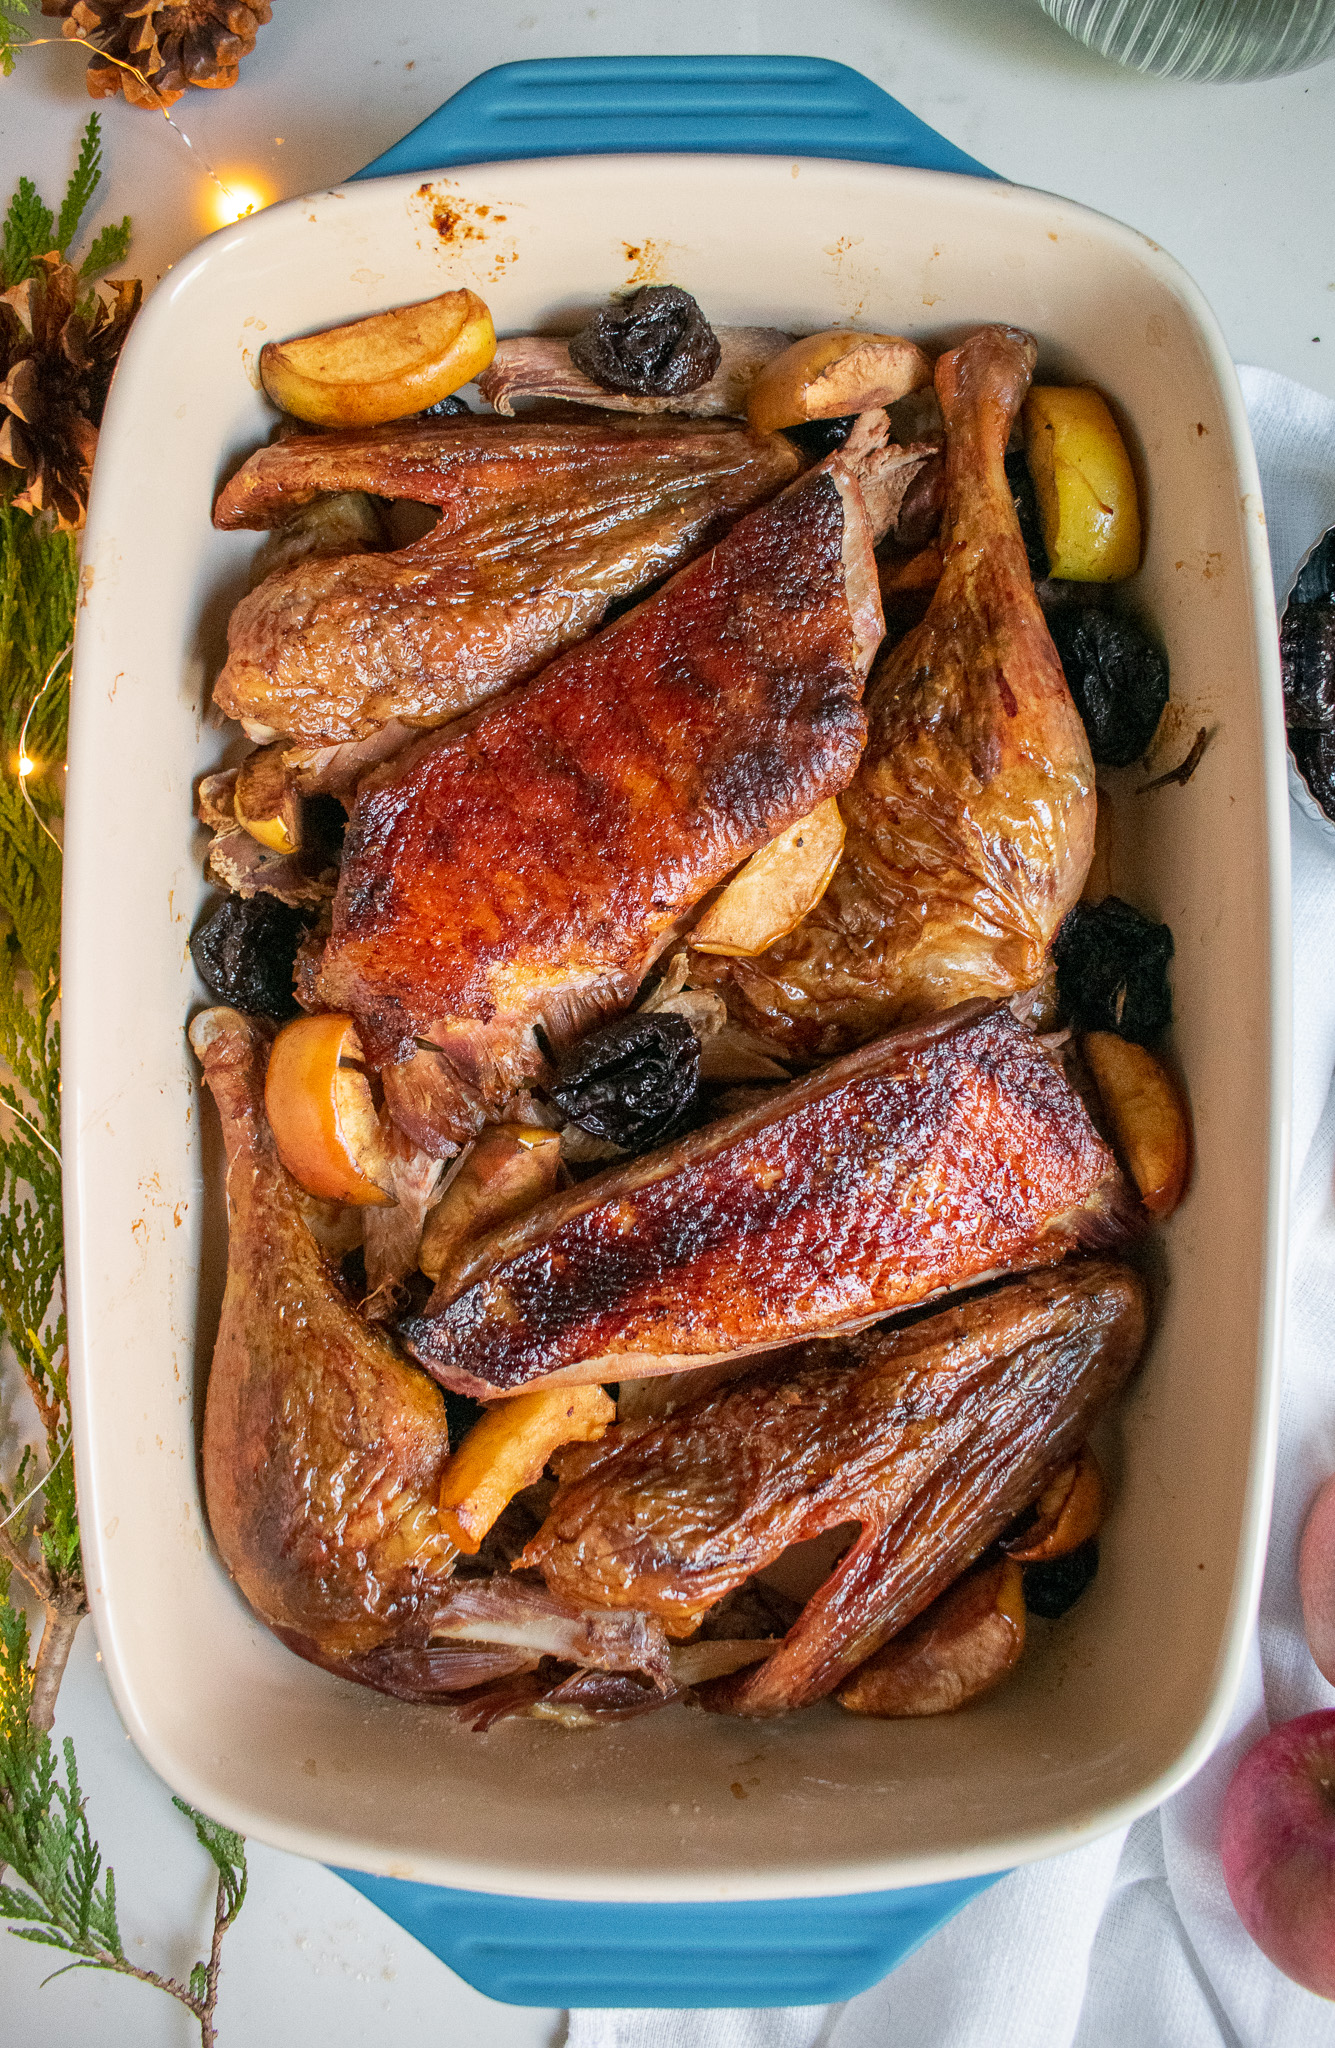 Whole Roasted Duck for a Festive Holiday Meal - The New York Times